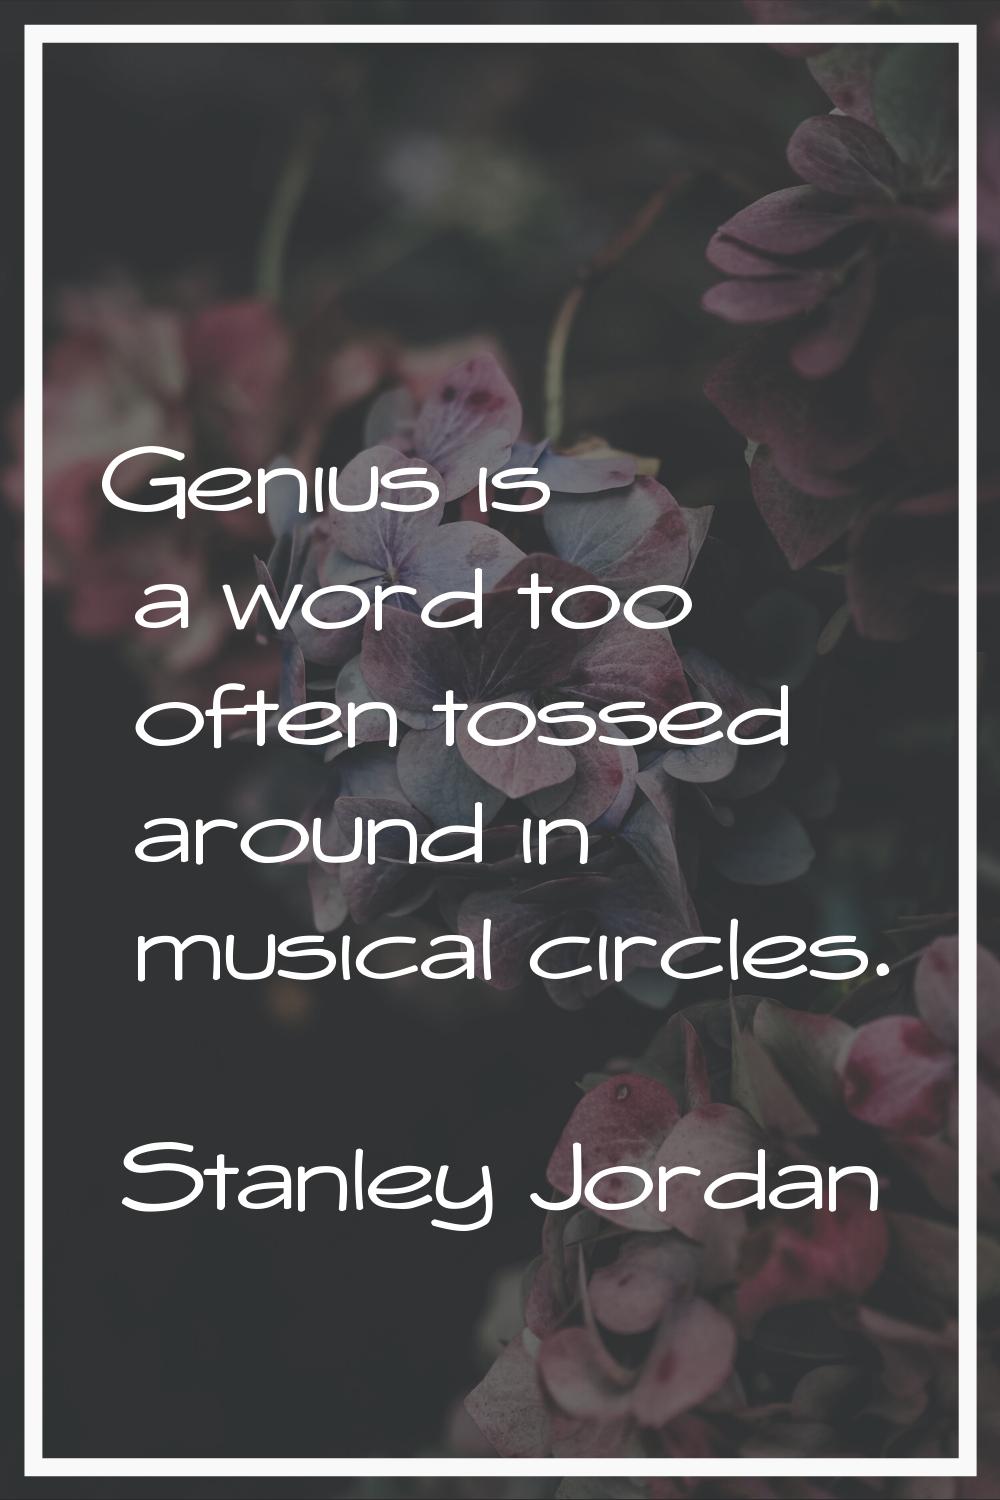 Genius is a word too often tossed around in musical circles.